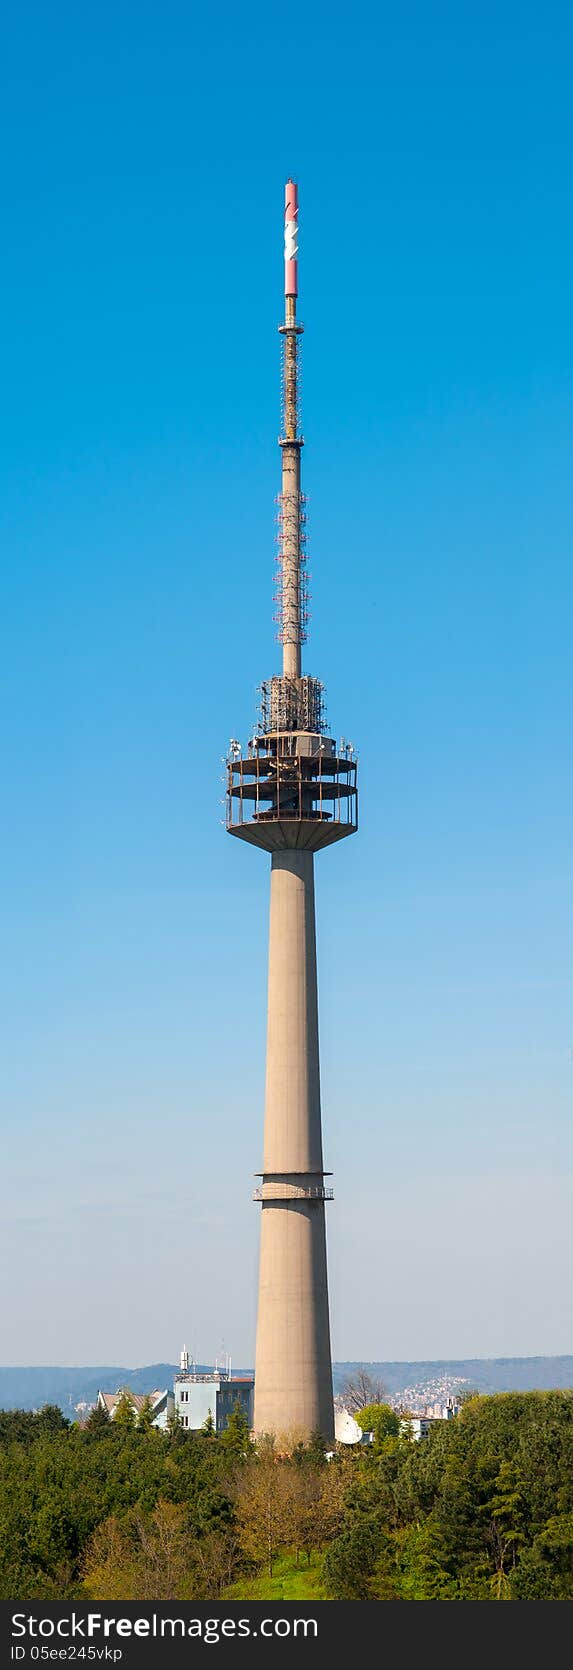 Vertical photo of a huge TV antenna tower, against blue sky. It is used for radio and TV broadcasting.